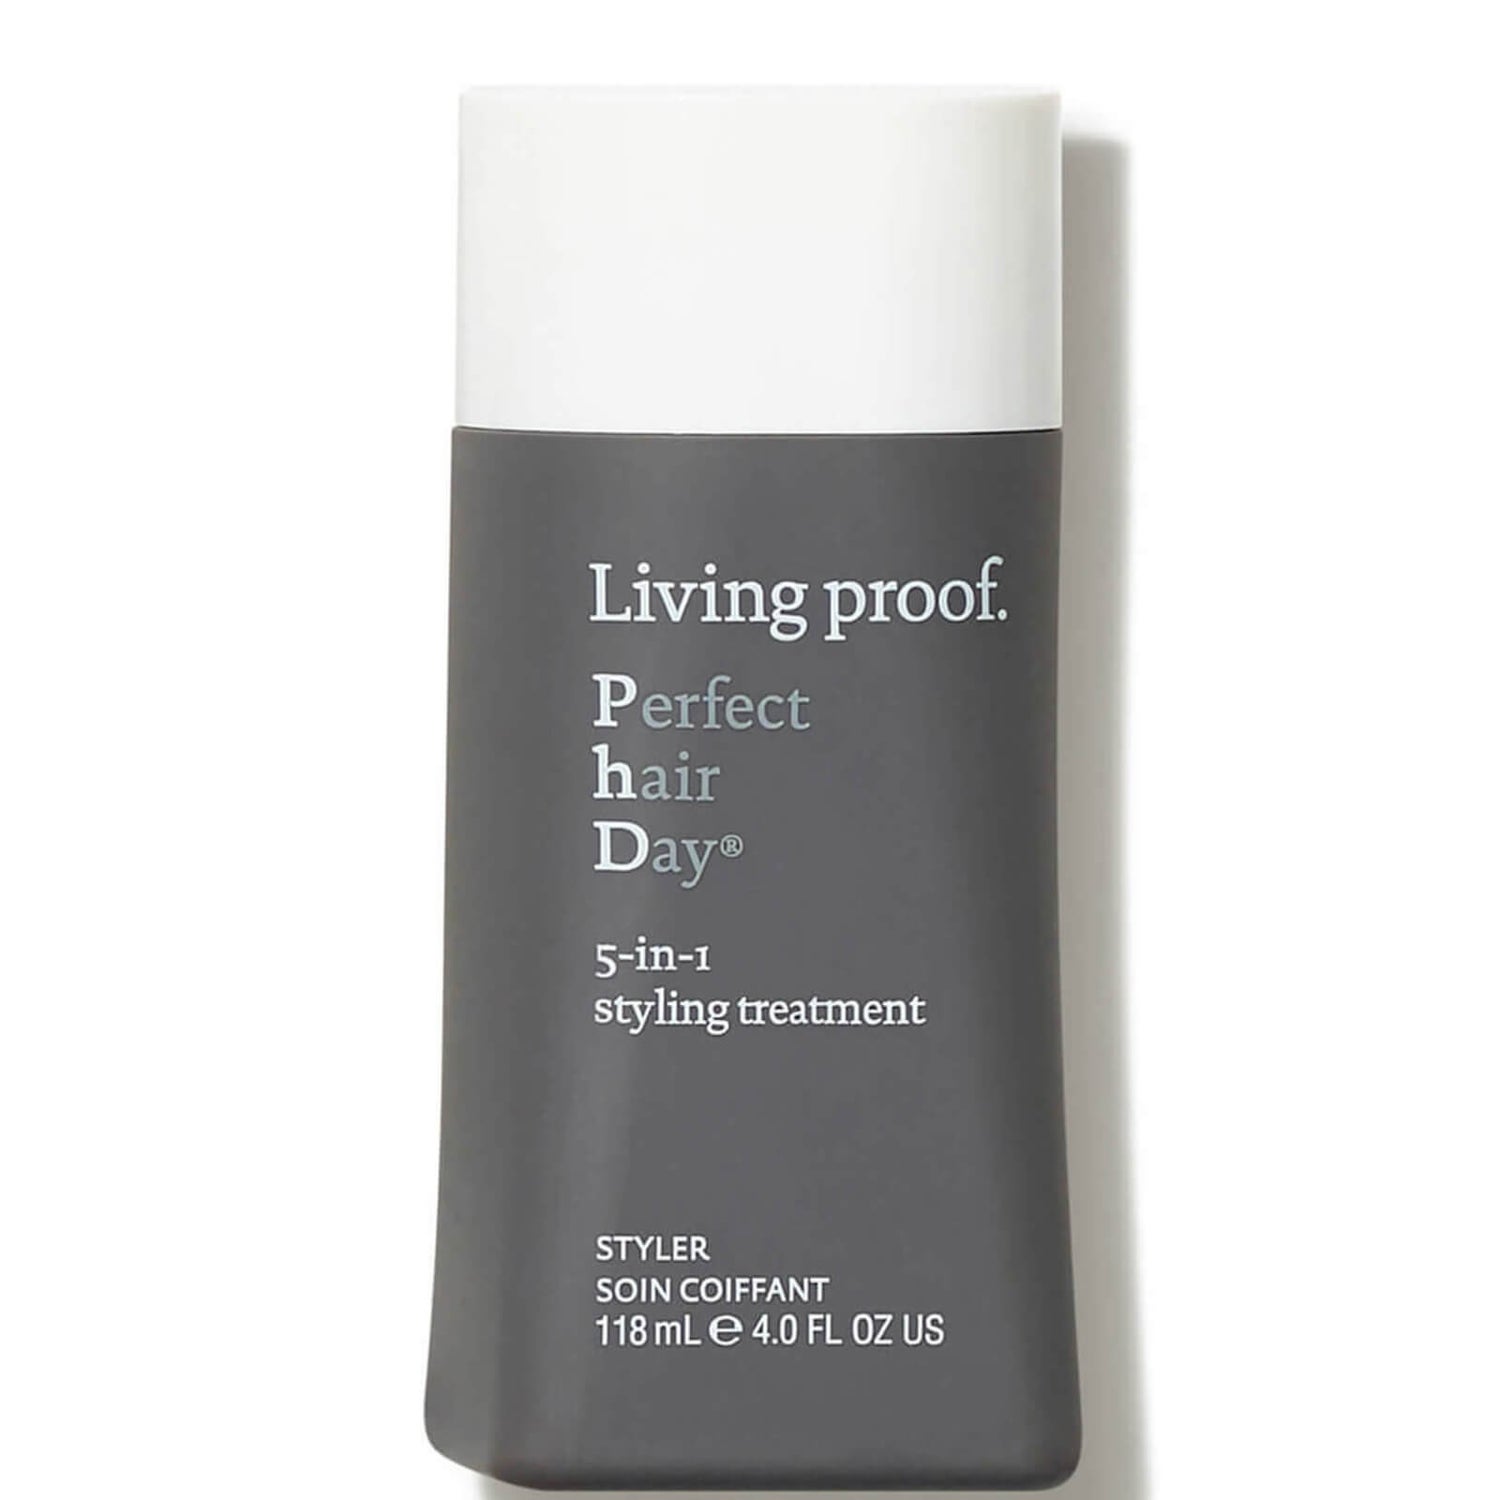 Living Proof Perfect Hair Day (PhD) Tratamento 5 em 1 Styling 118ml